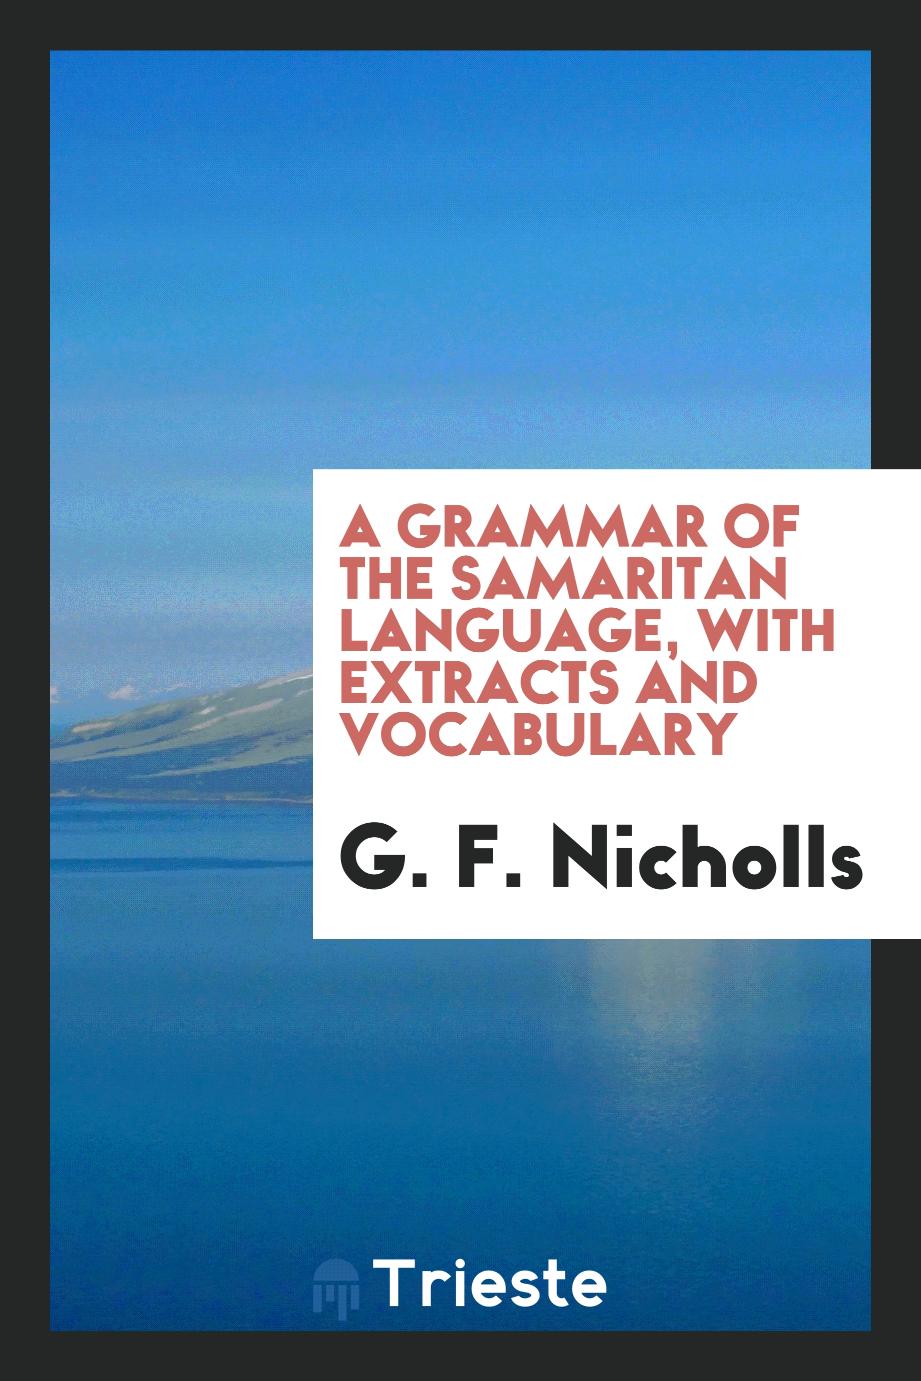 A grammar of the Samaritan language, with extracts and vocabulary